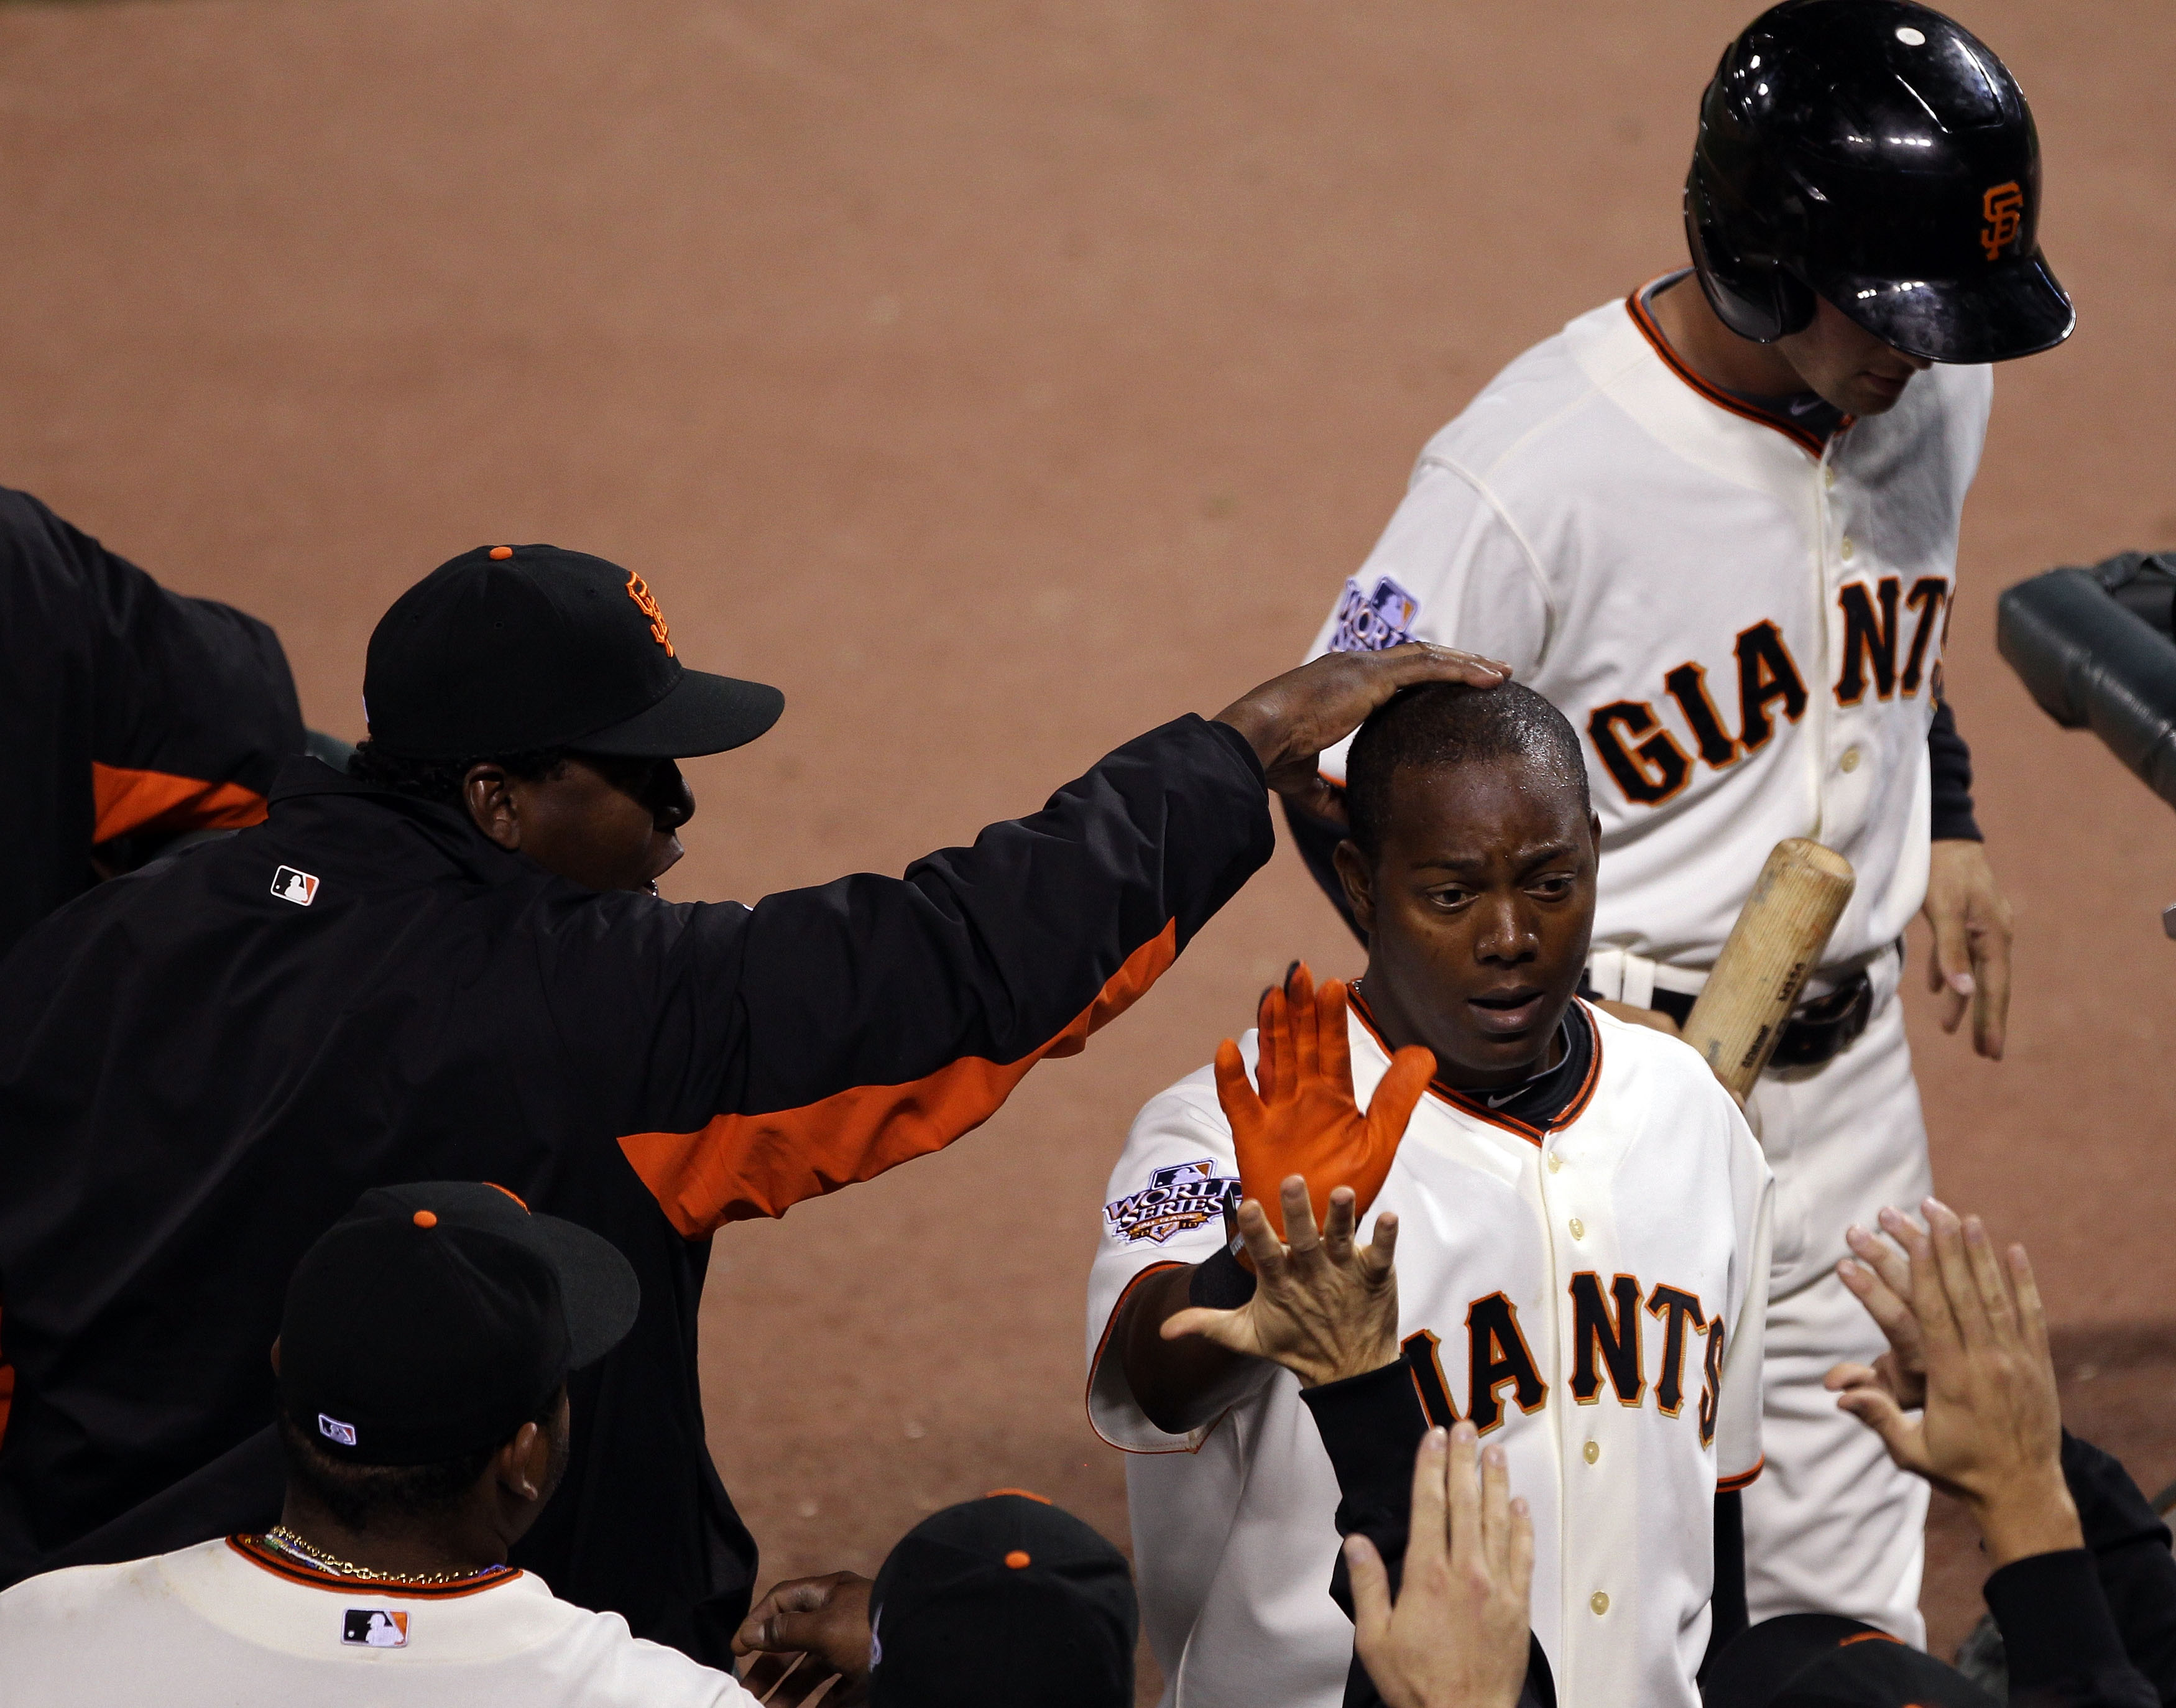 SAN FRANCISCO - OCTOBER 28:  (R) Edgar Renteria #16 of the San Francisco Giants is greeted by teammates in the dugout after scoring a run in the eighth inning taking on the Texas Rangers in Game Two of the 2010 MLB World Series at AT&T Park on October 28,